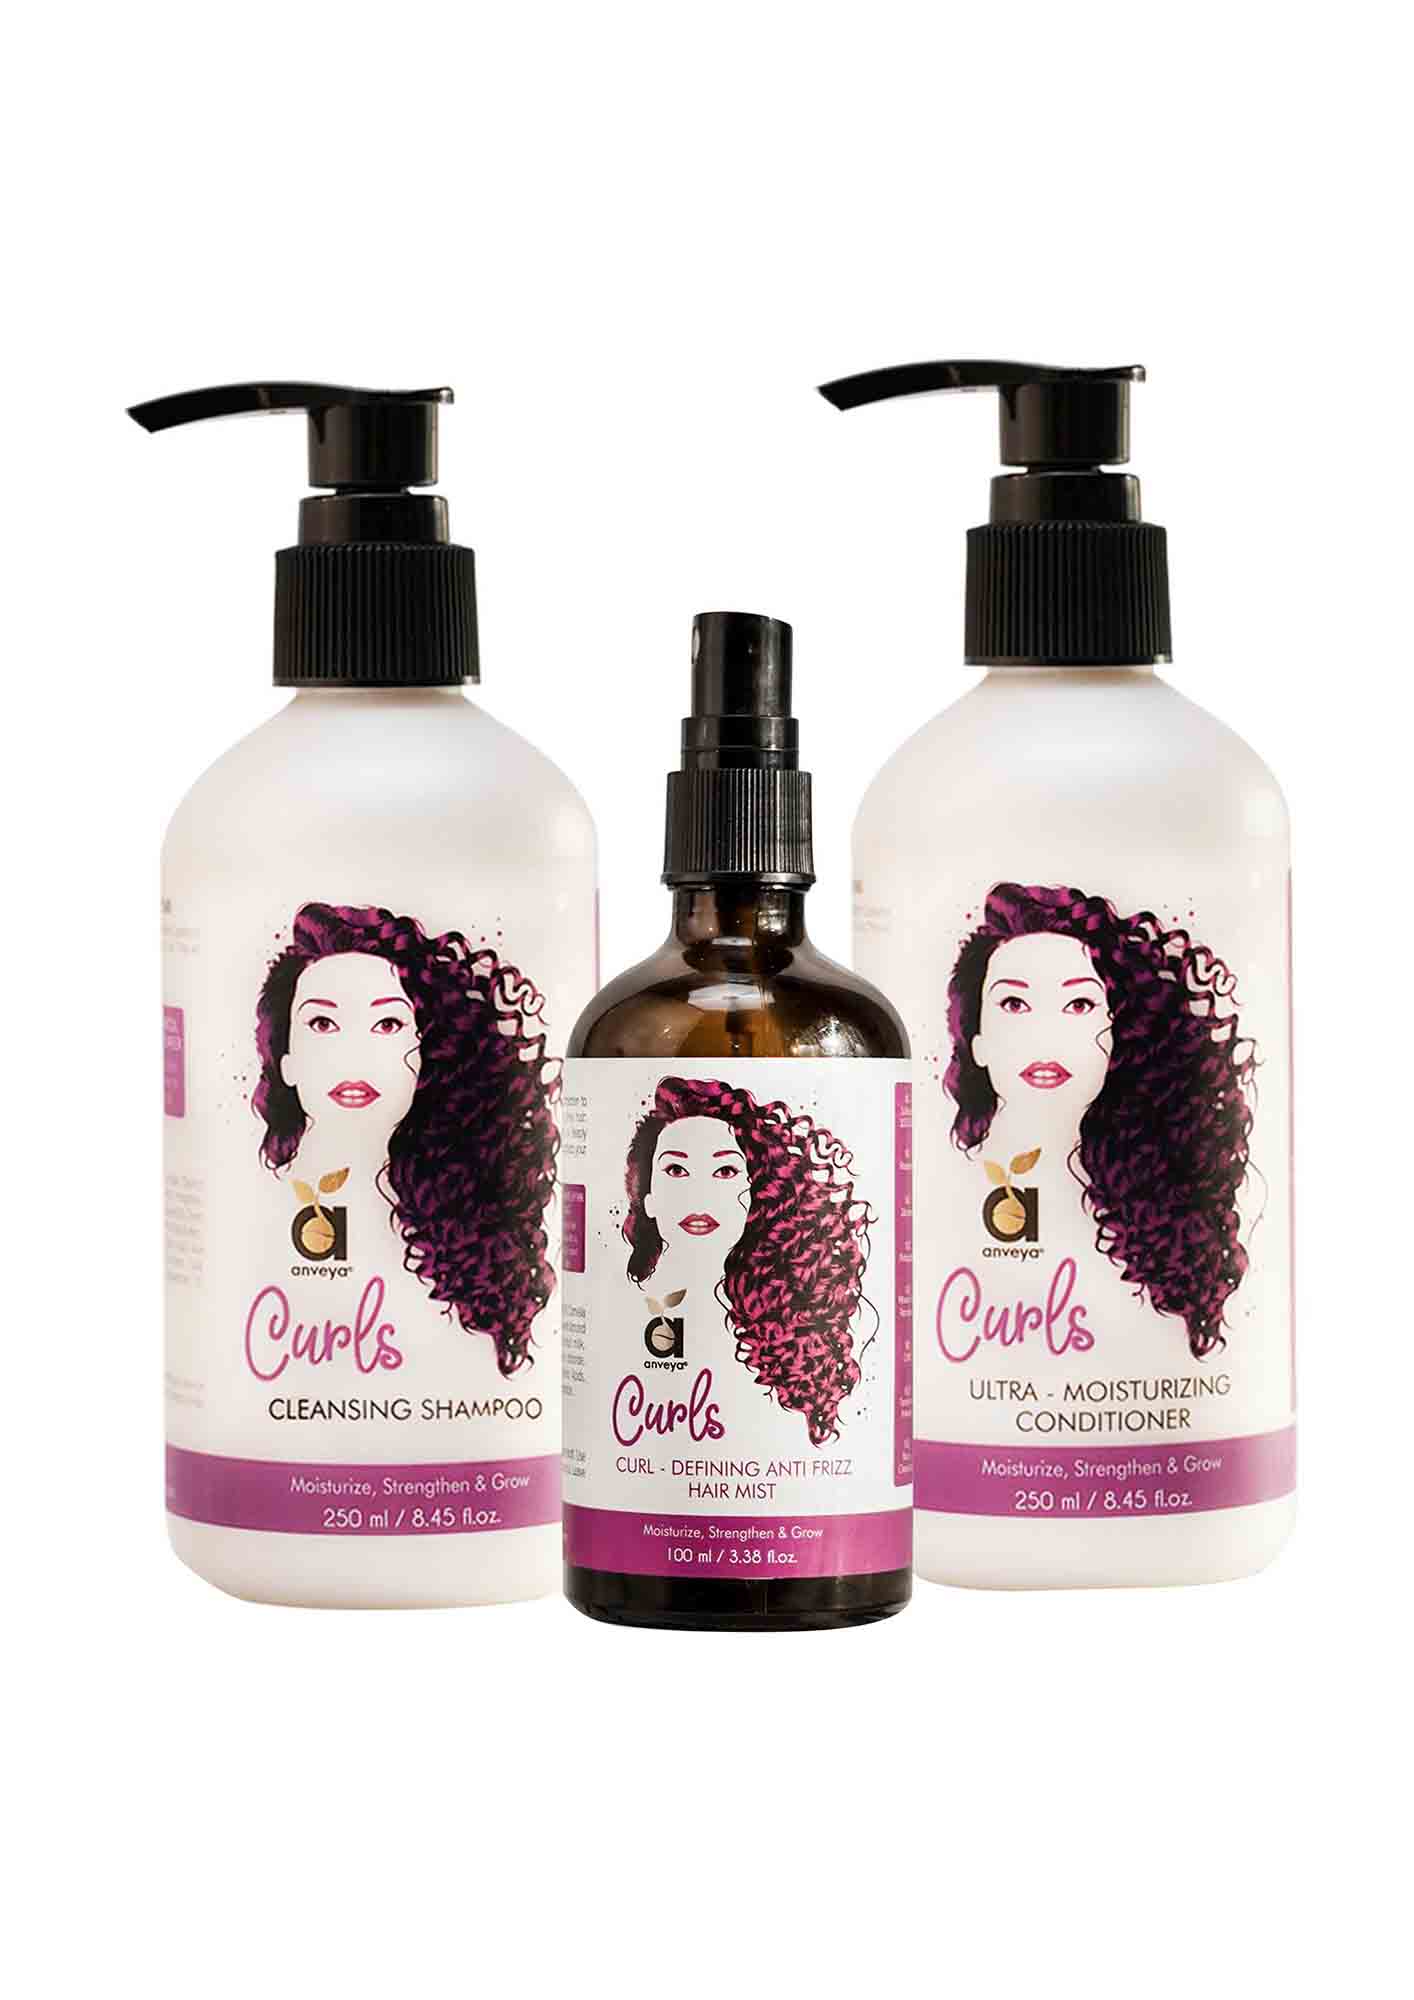 Anveya Curls Care Kit - Shampoo, Conditioner & Hair Mist: For Soft, Bouncy & Frizz-Free Curly Hair